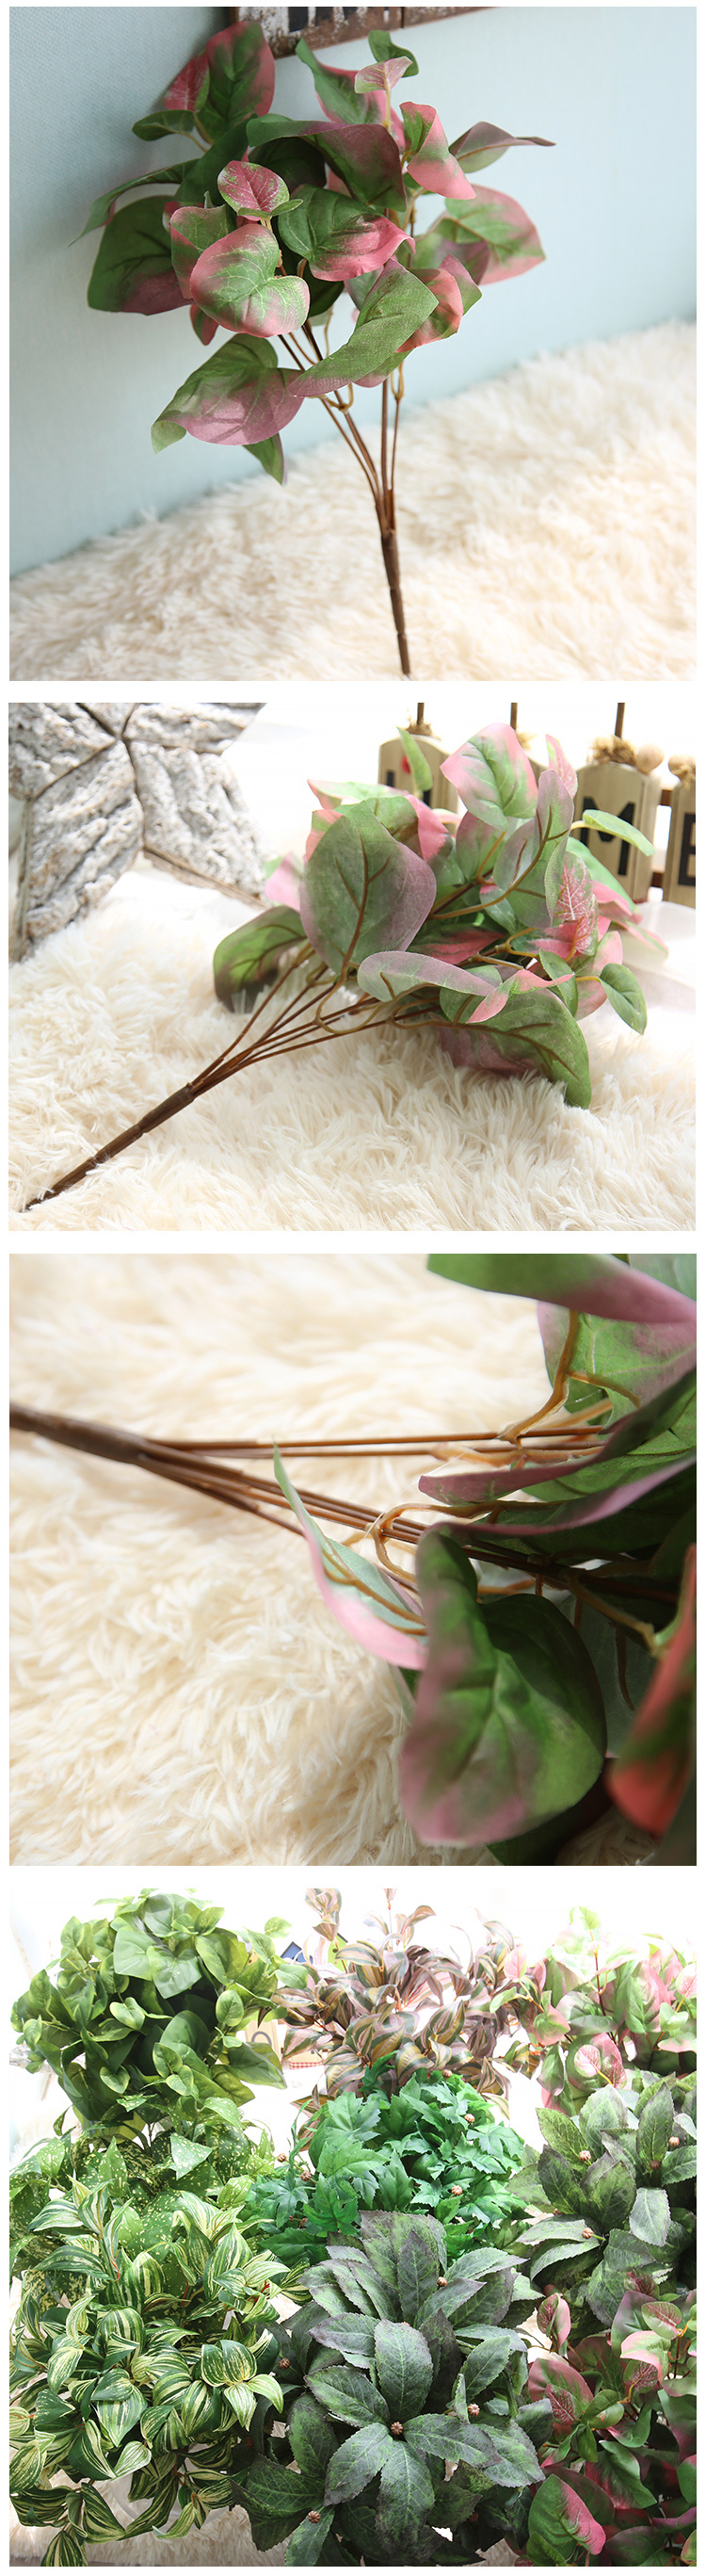 Artificial Leaves with Faux Stems Tropical Plant for Party MW34536